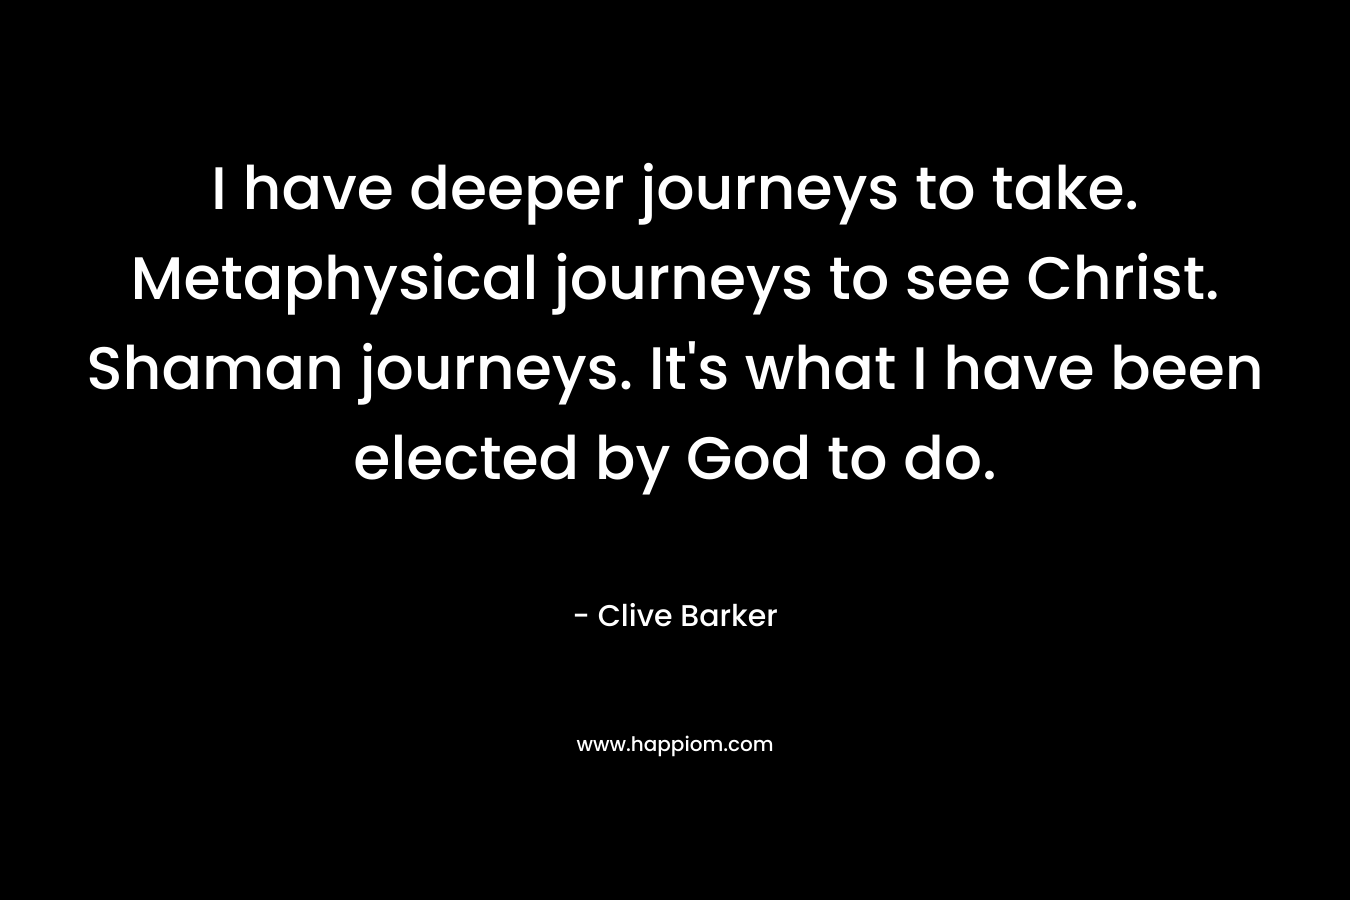 I have deeper journeys to take. Metaphysical journeys to see Christ. Shaman journeys. It's what I have been elected by God to do.